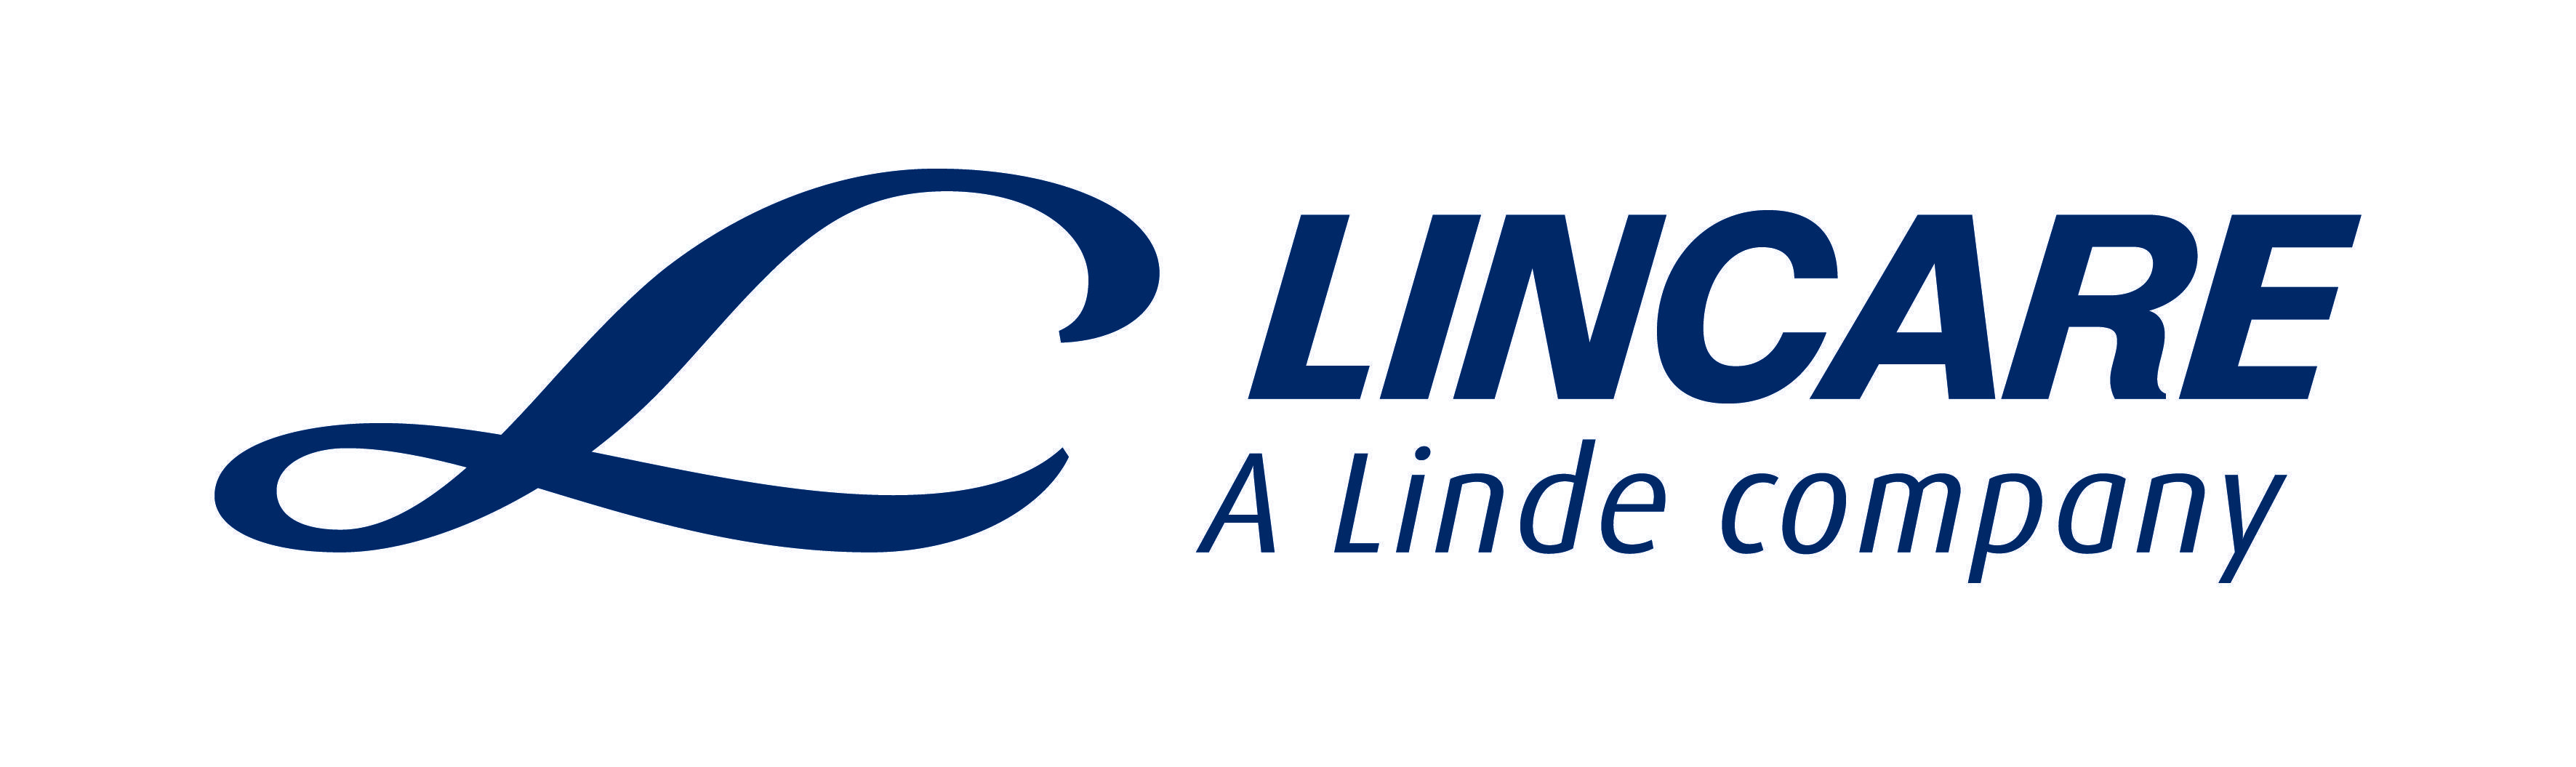 Acquisition Logo - Lincare, a Linde subsidiary, closes acquisition of American ...